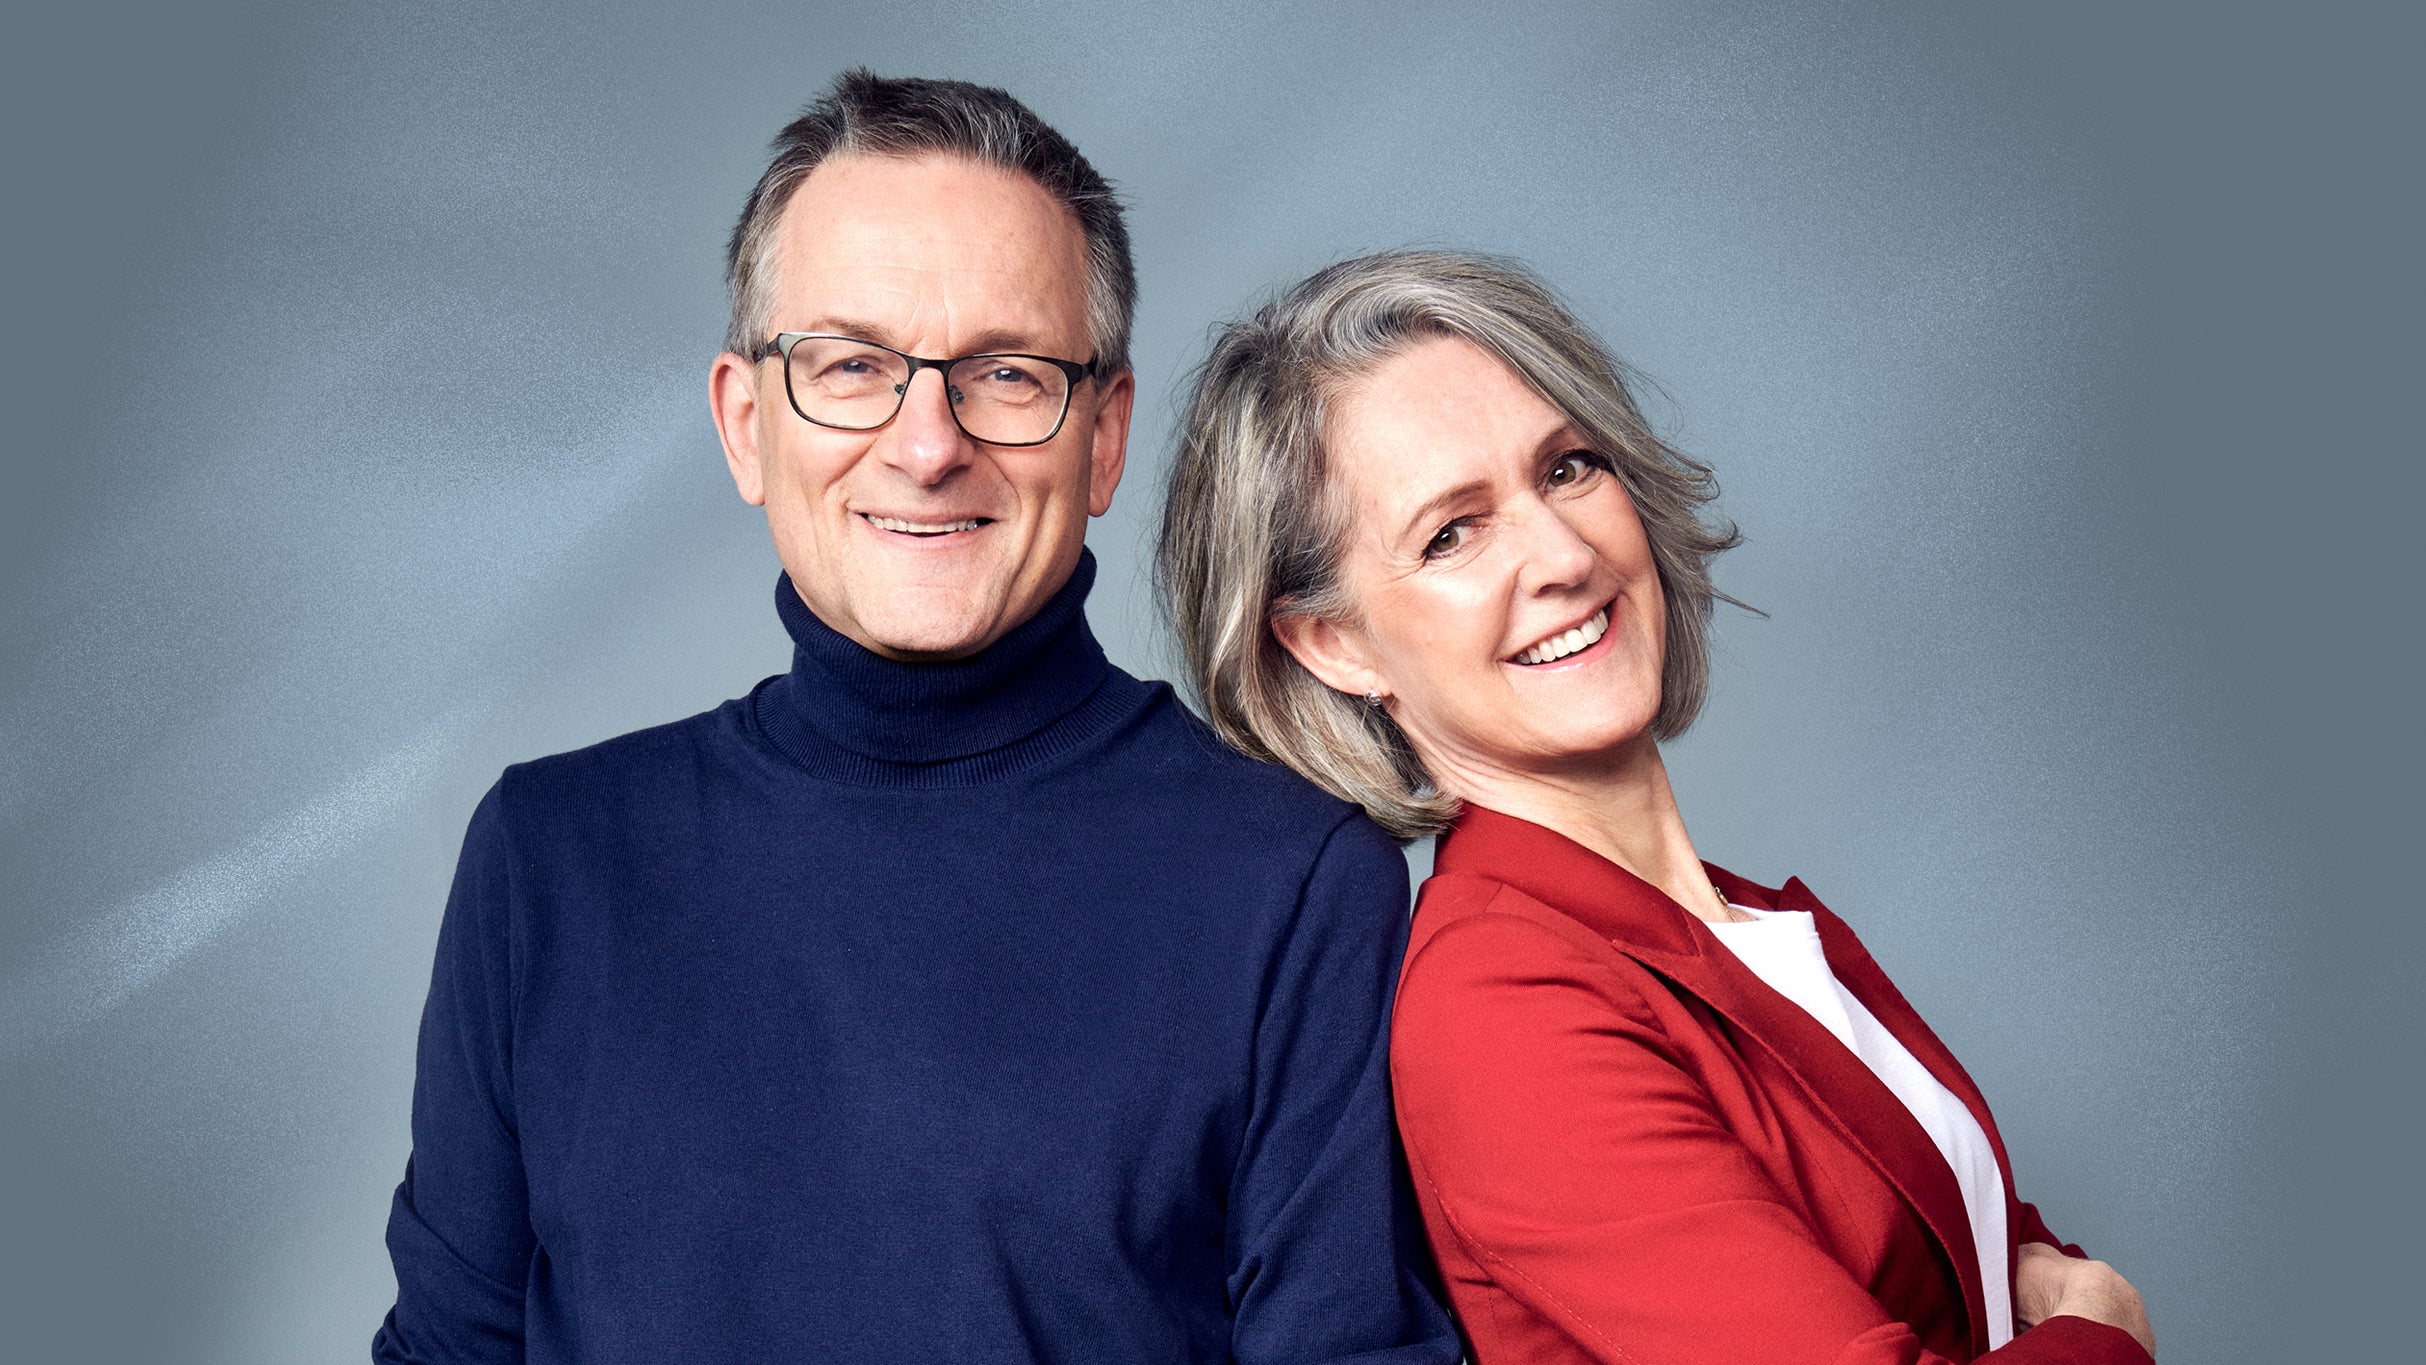 Dr Michael Mosley and Clare Bailey